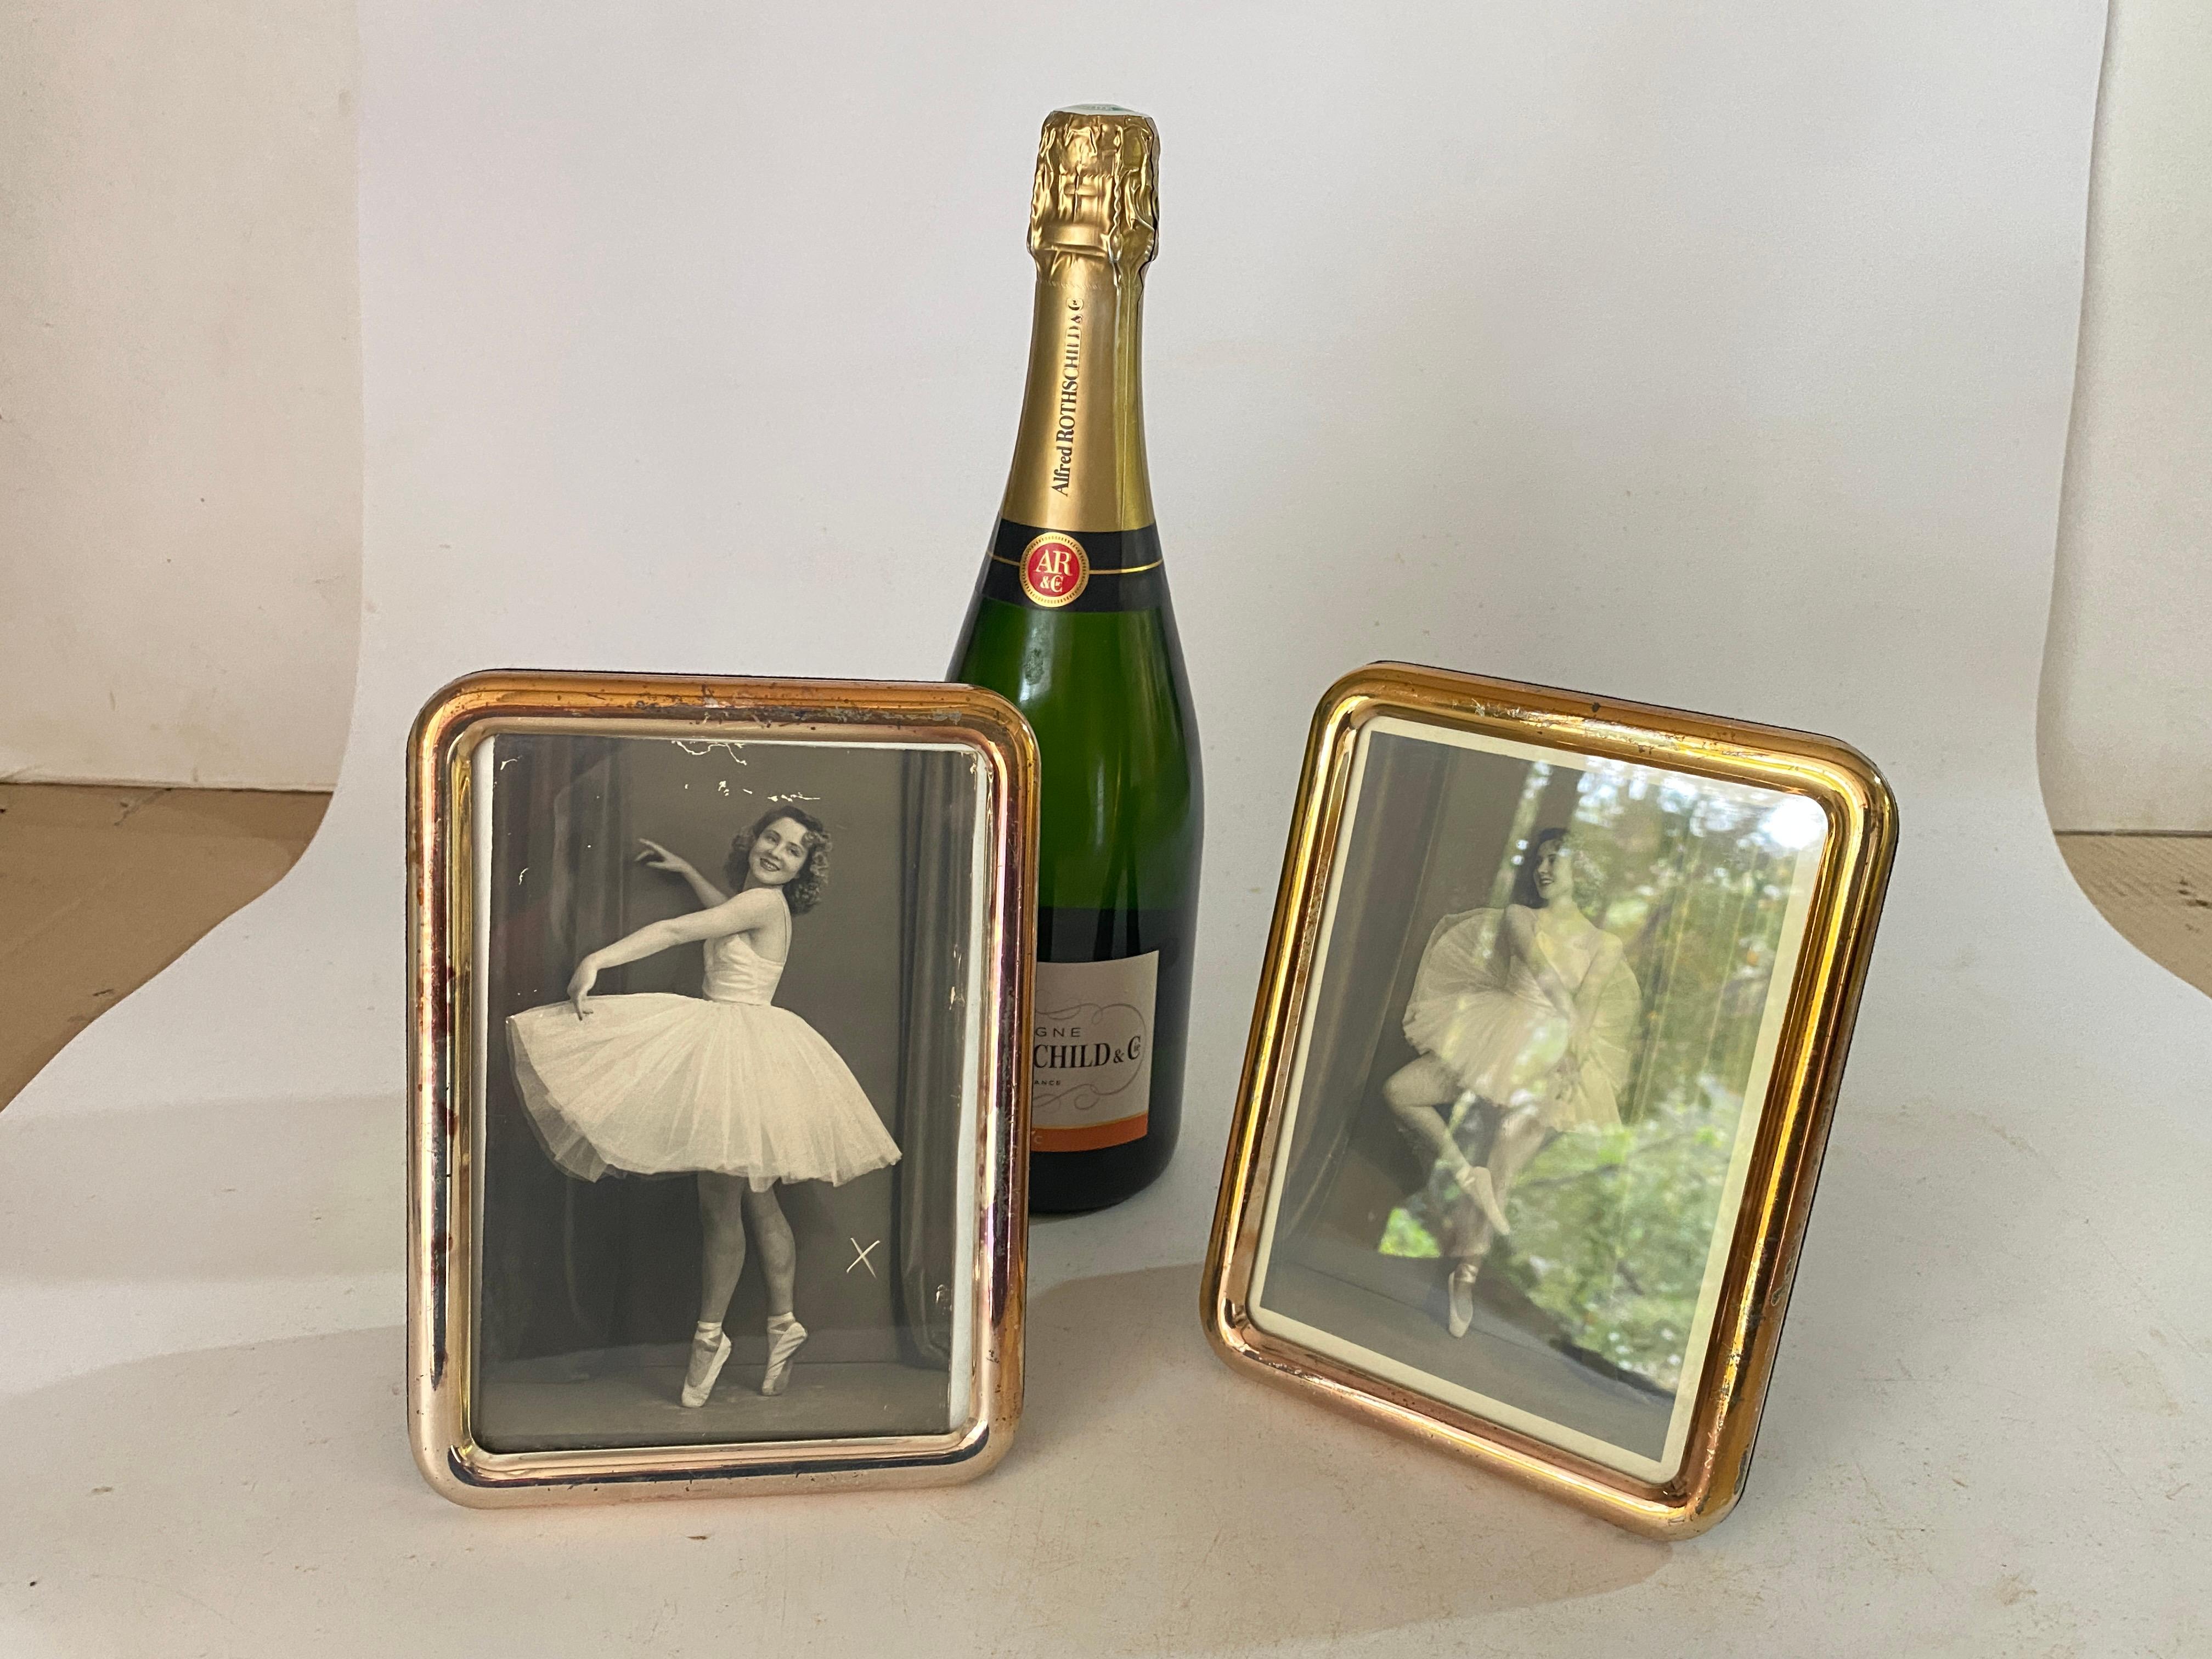 Vintage Italian picture frame, 1970s. this has been made in Italy. In gilt Metal.
The pictures are from the 50's, with a beatiful Daneur.